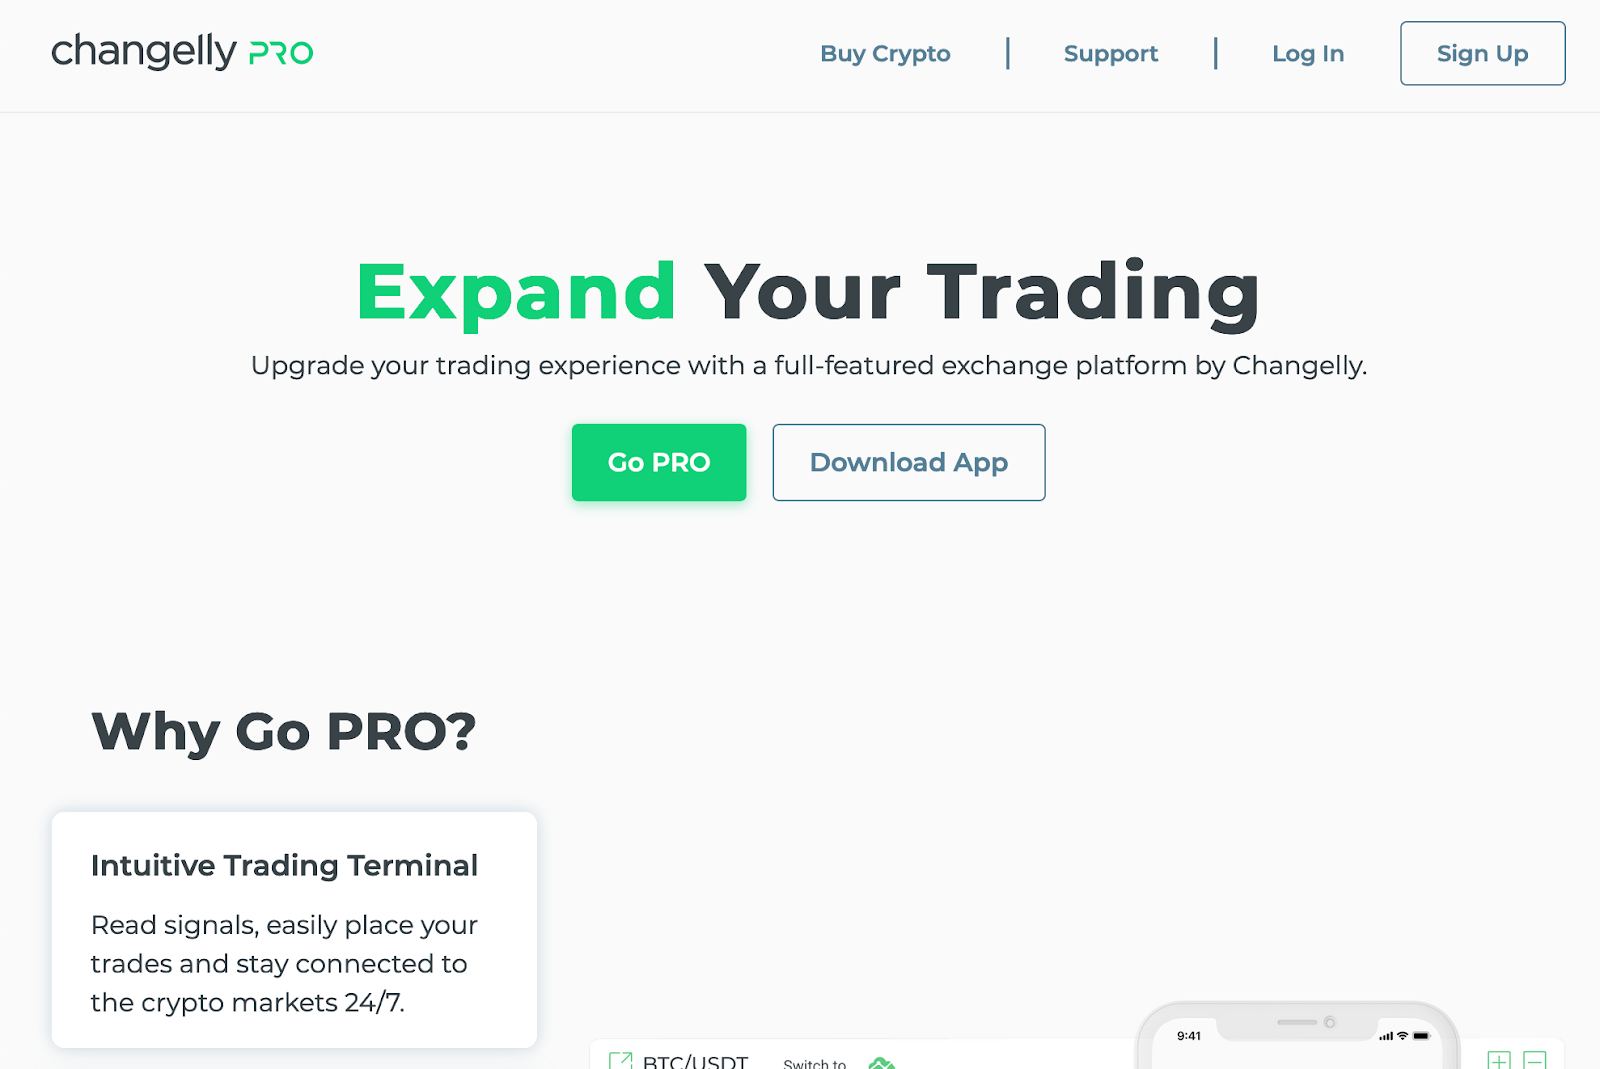 margin-trading-changelly-pro-trading-with-leverage